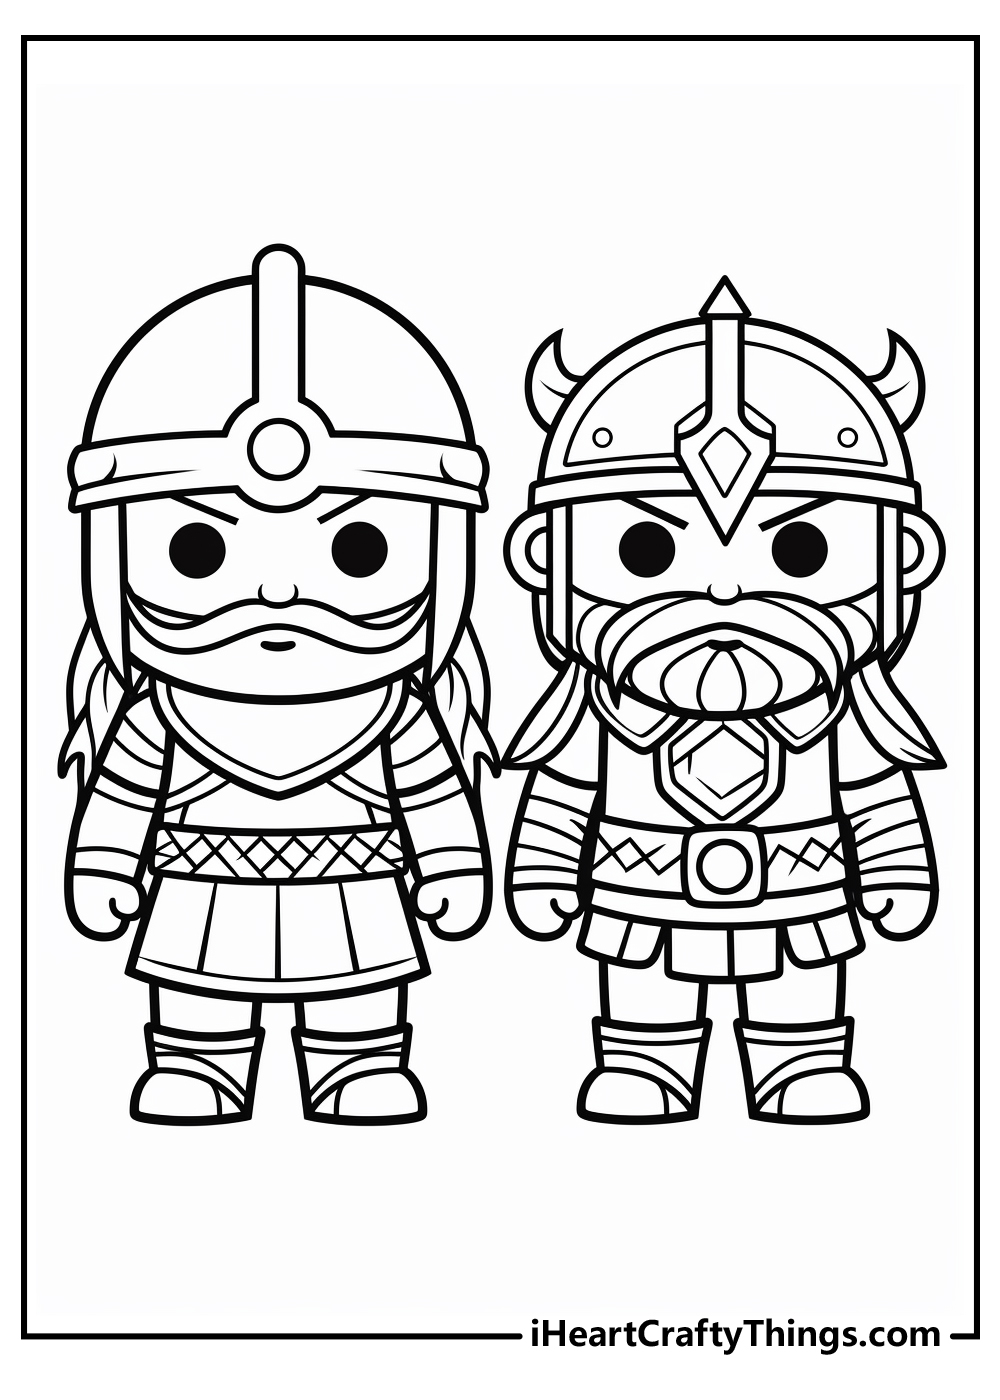 new viking coloring pages